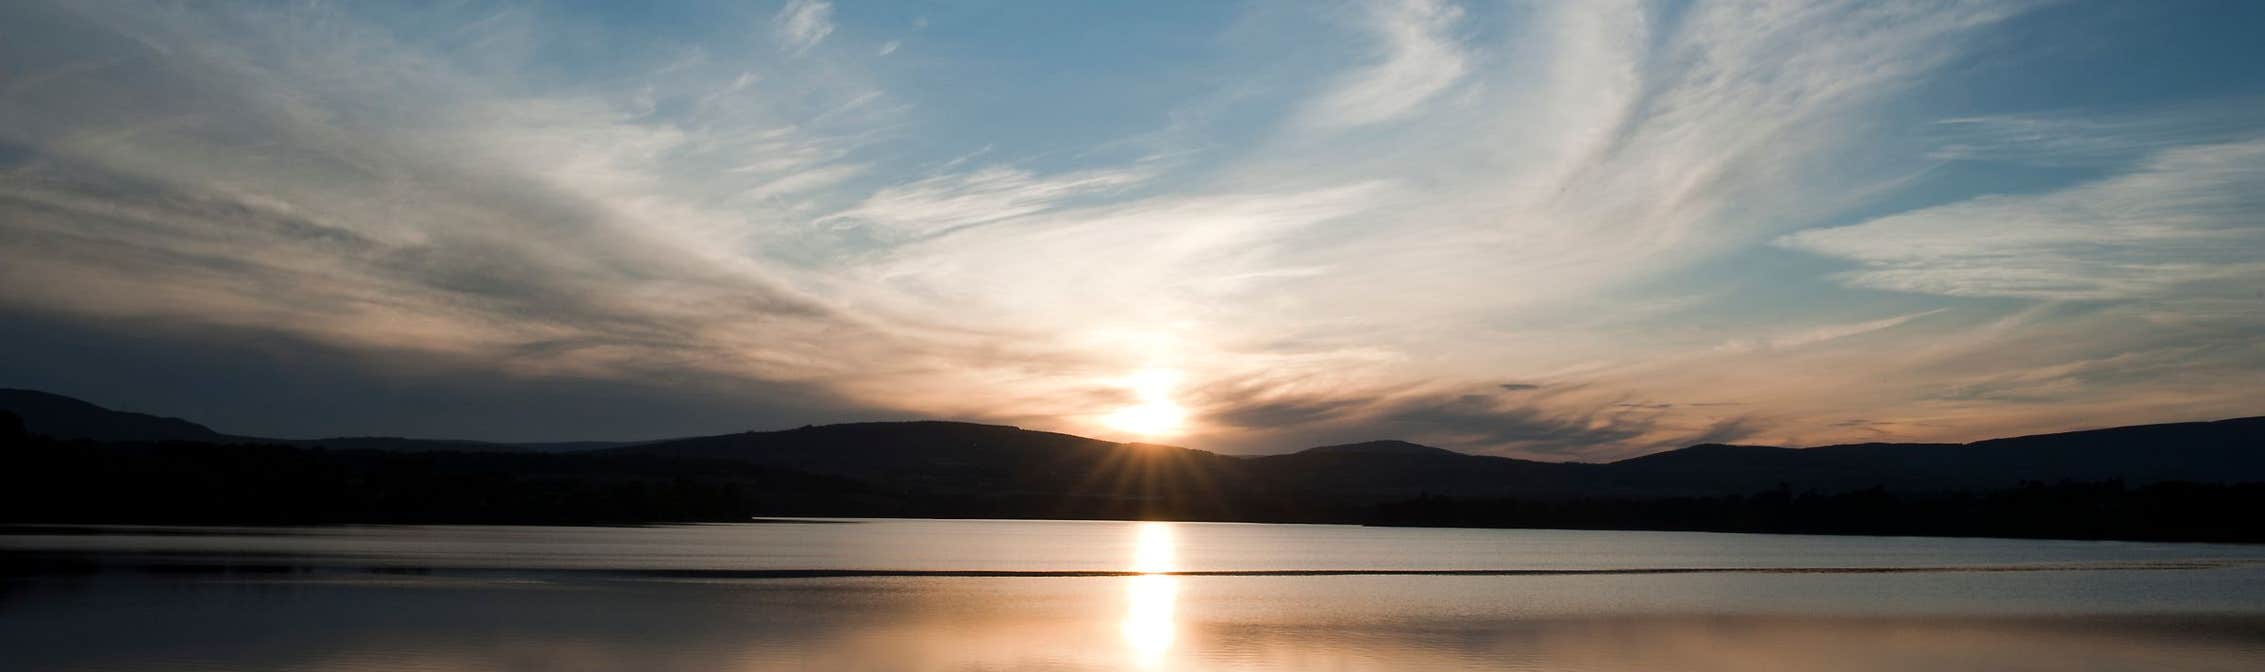 Image of the sunsetting in Roundwood in County Wicklow